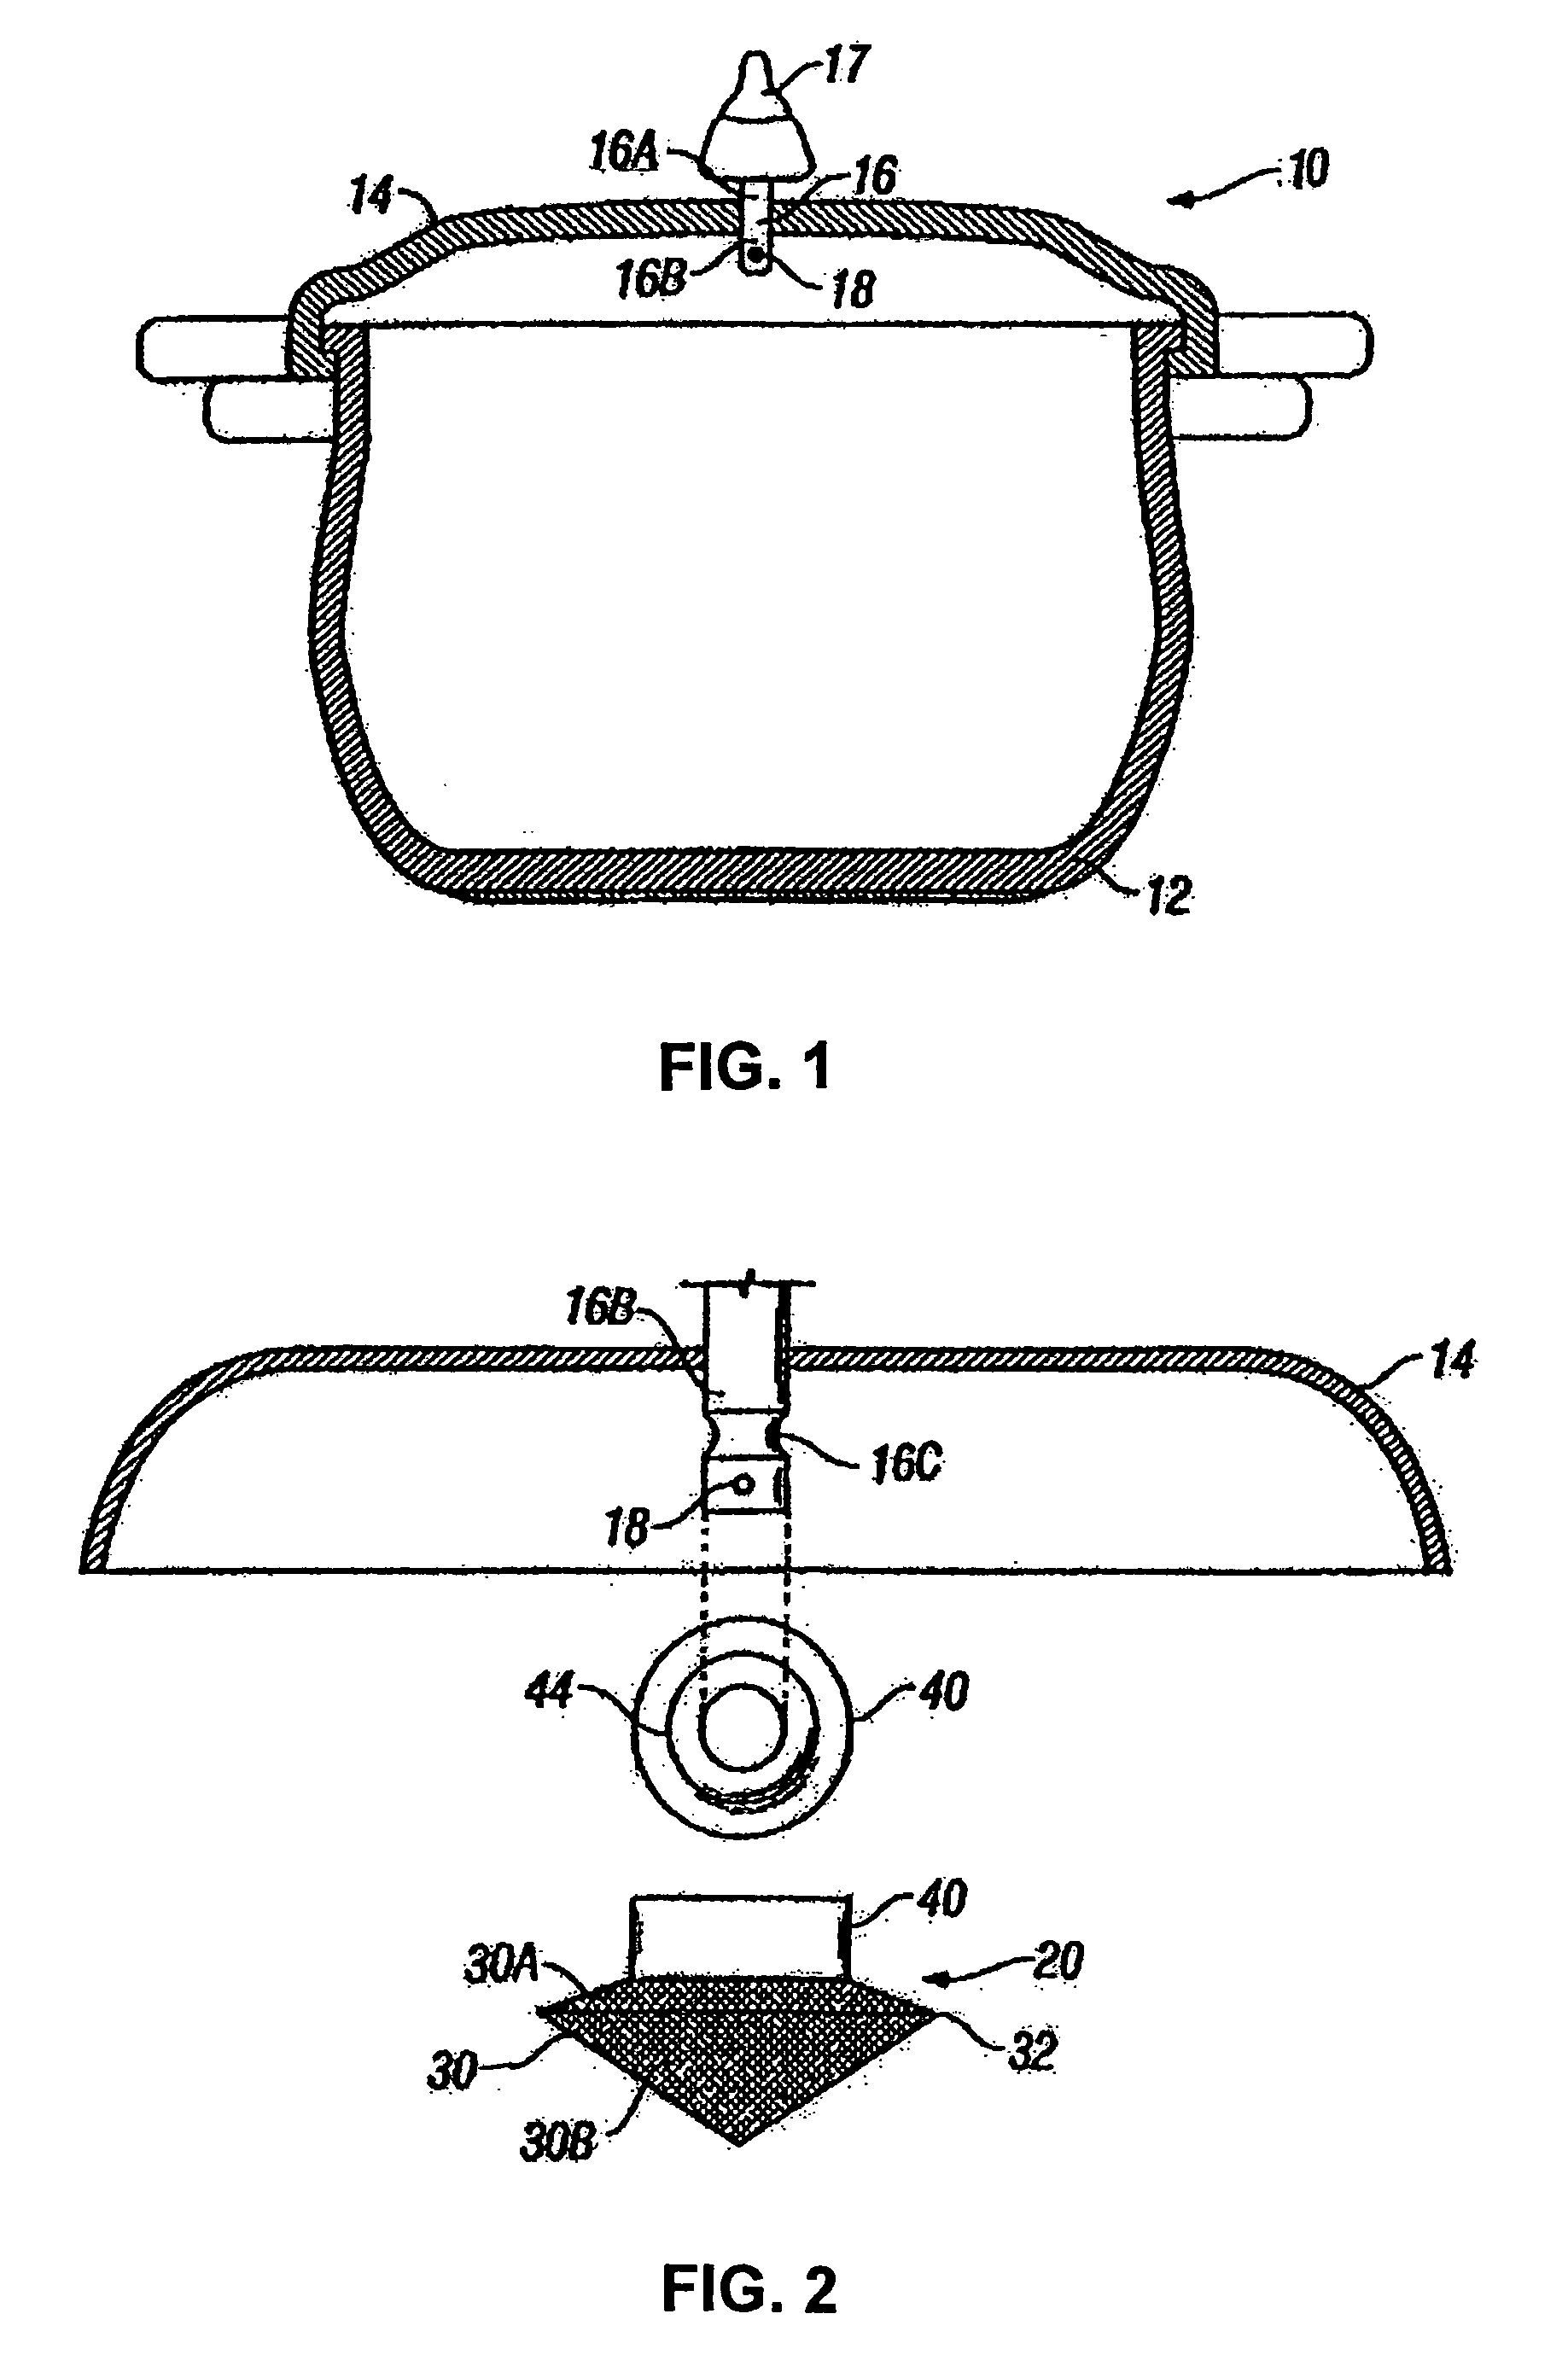 Safety cap for a pressure release valve of a pressure cooker and a pressure cooker using the same